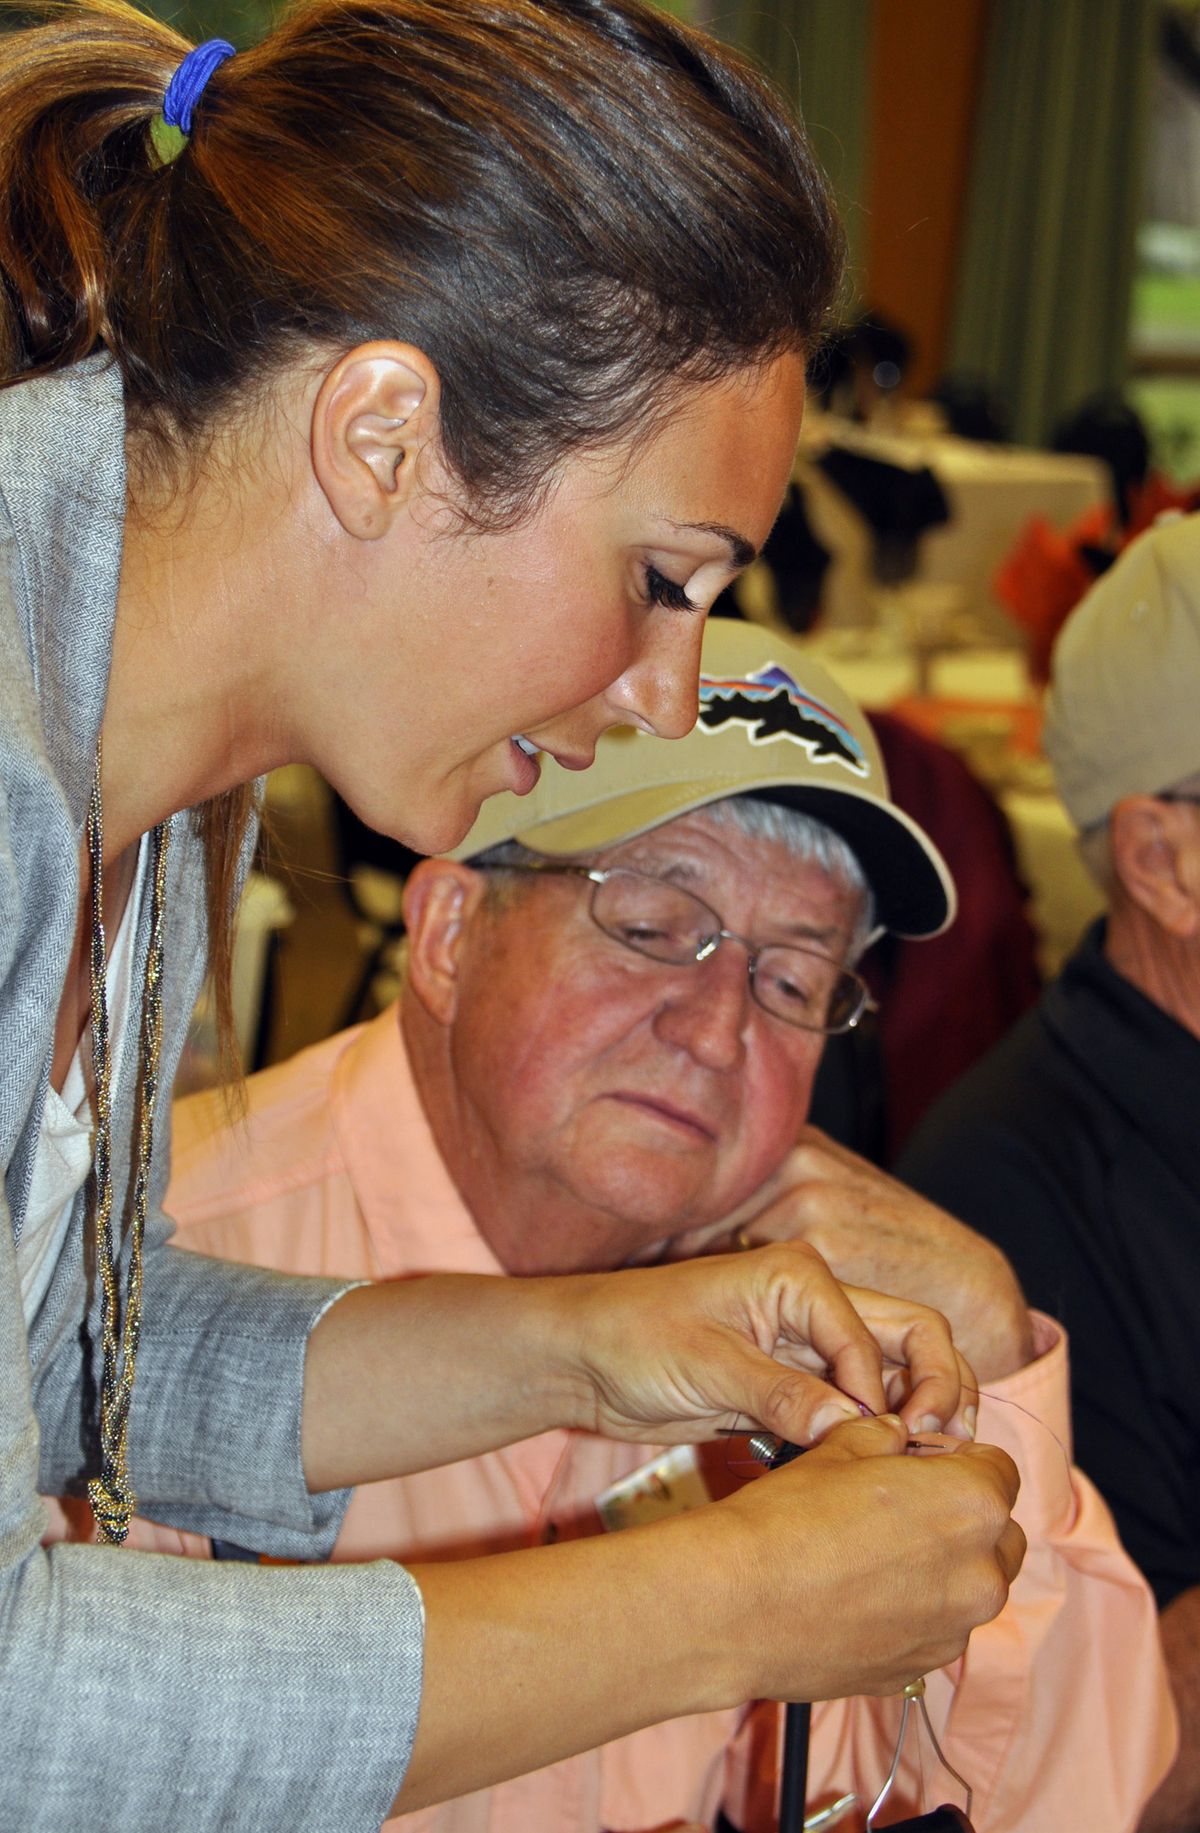 April Vokey shows fly-tying techniques to Neal Beechinor of the Inland Empire Fly Fishing Club. (Rich Landers)